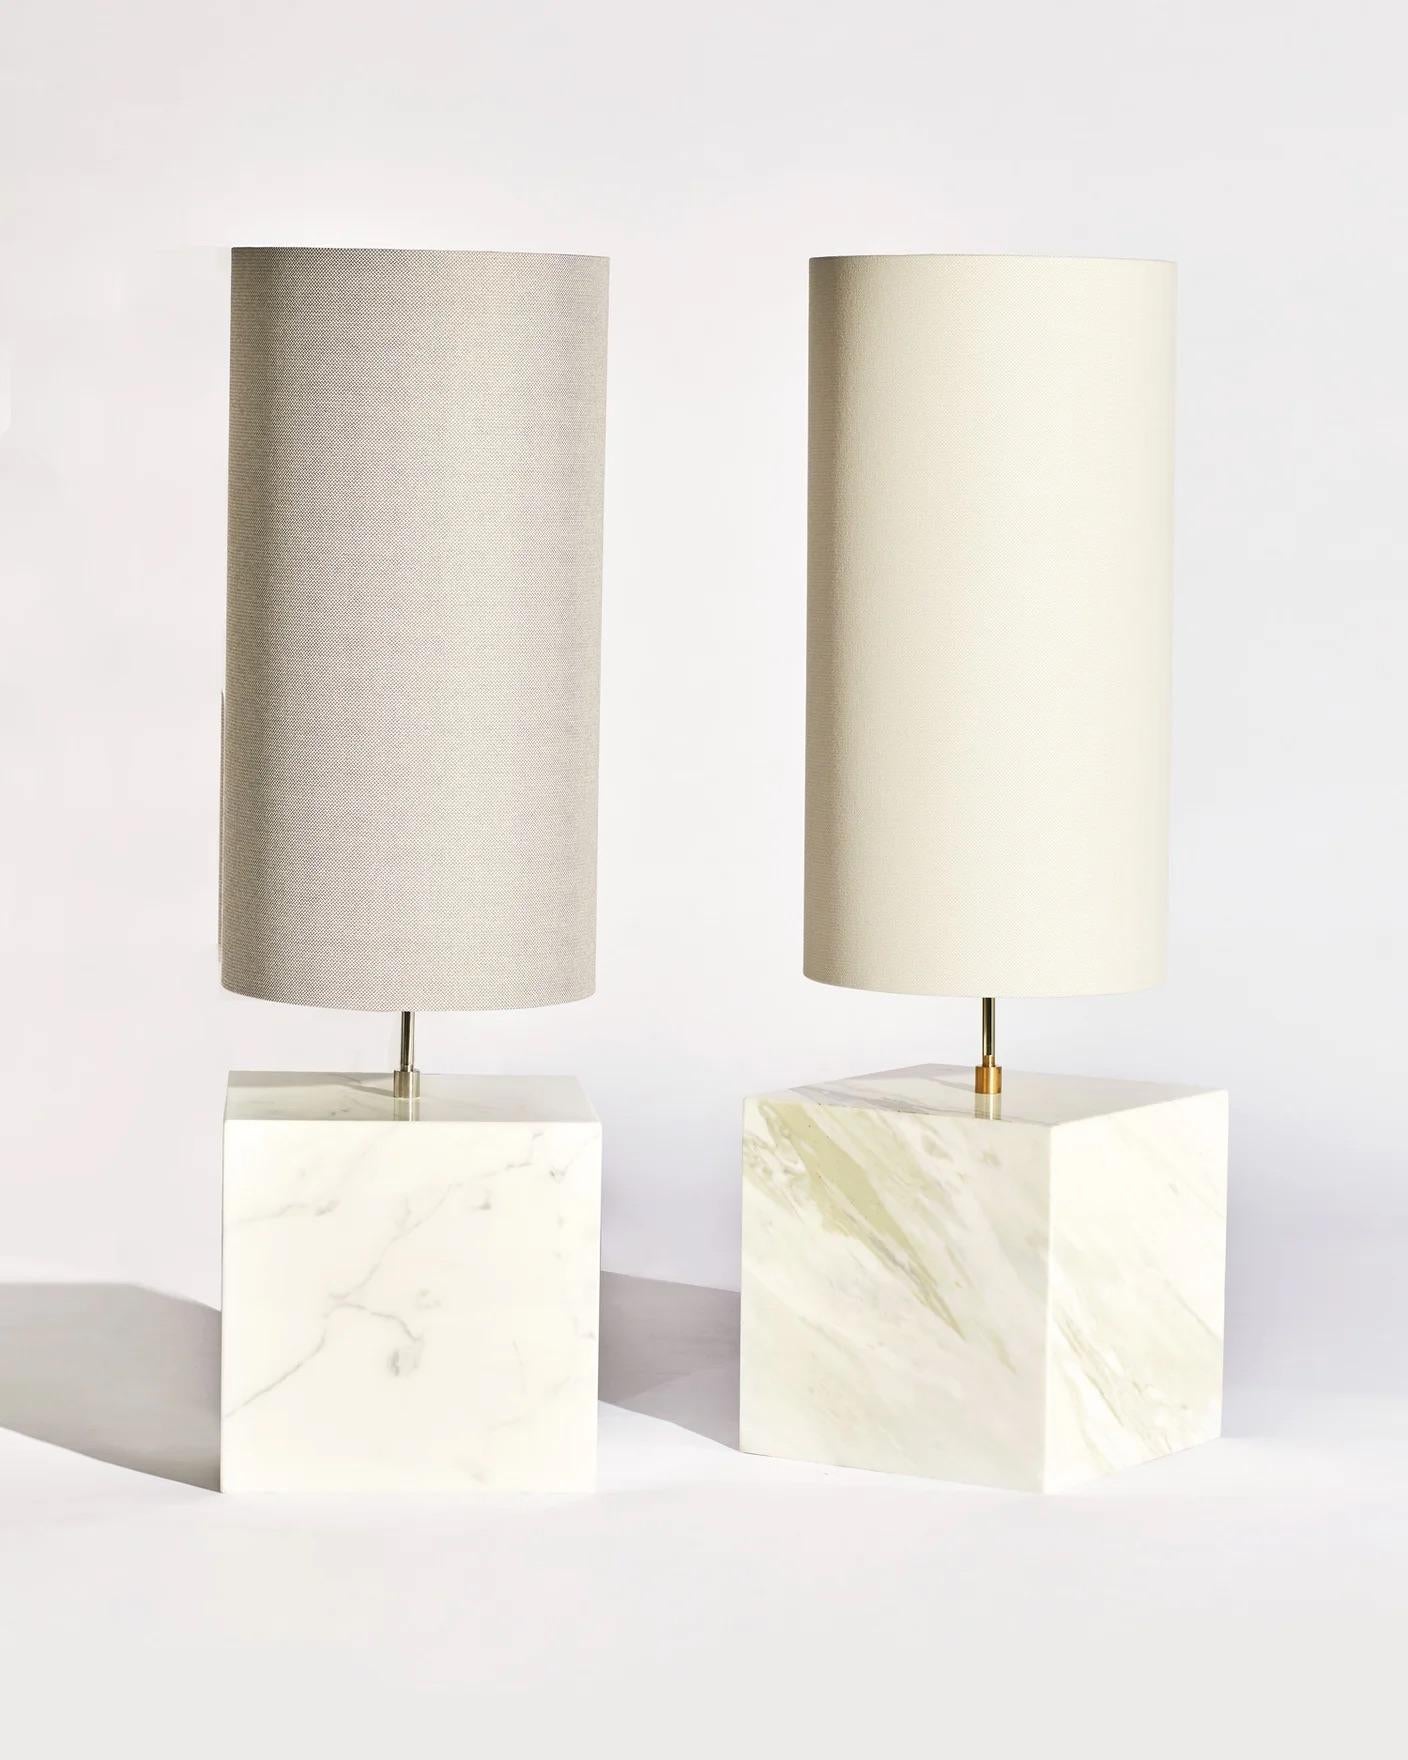 American Cielo Marble & Brass Coexist Table Lamp 'Large' by Slash Objects - Floor Sample For Sale